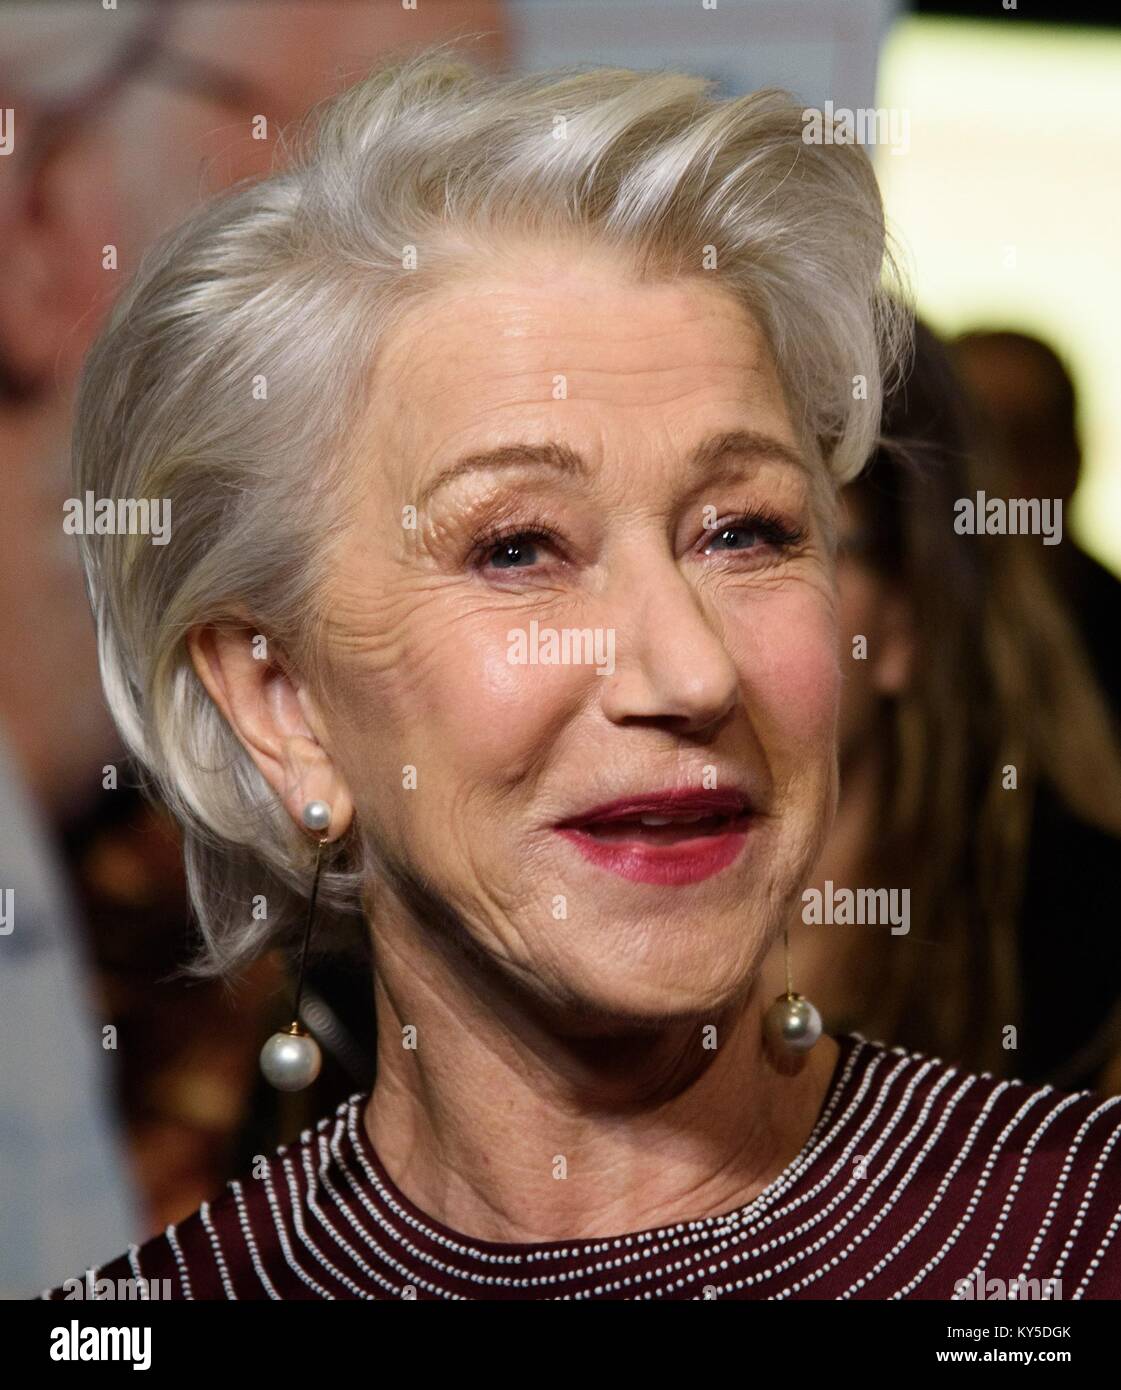 New York, NY, USA. 11th Jan, 2018. Helen Mirren at arrivals for THE LEISURE SEEKER Screening, AMC Loews Lincoln Square, New York, NY January 11, 2018. Credit: RCF/Everett Collection/Alamy Live News Stock Photo